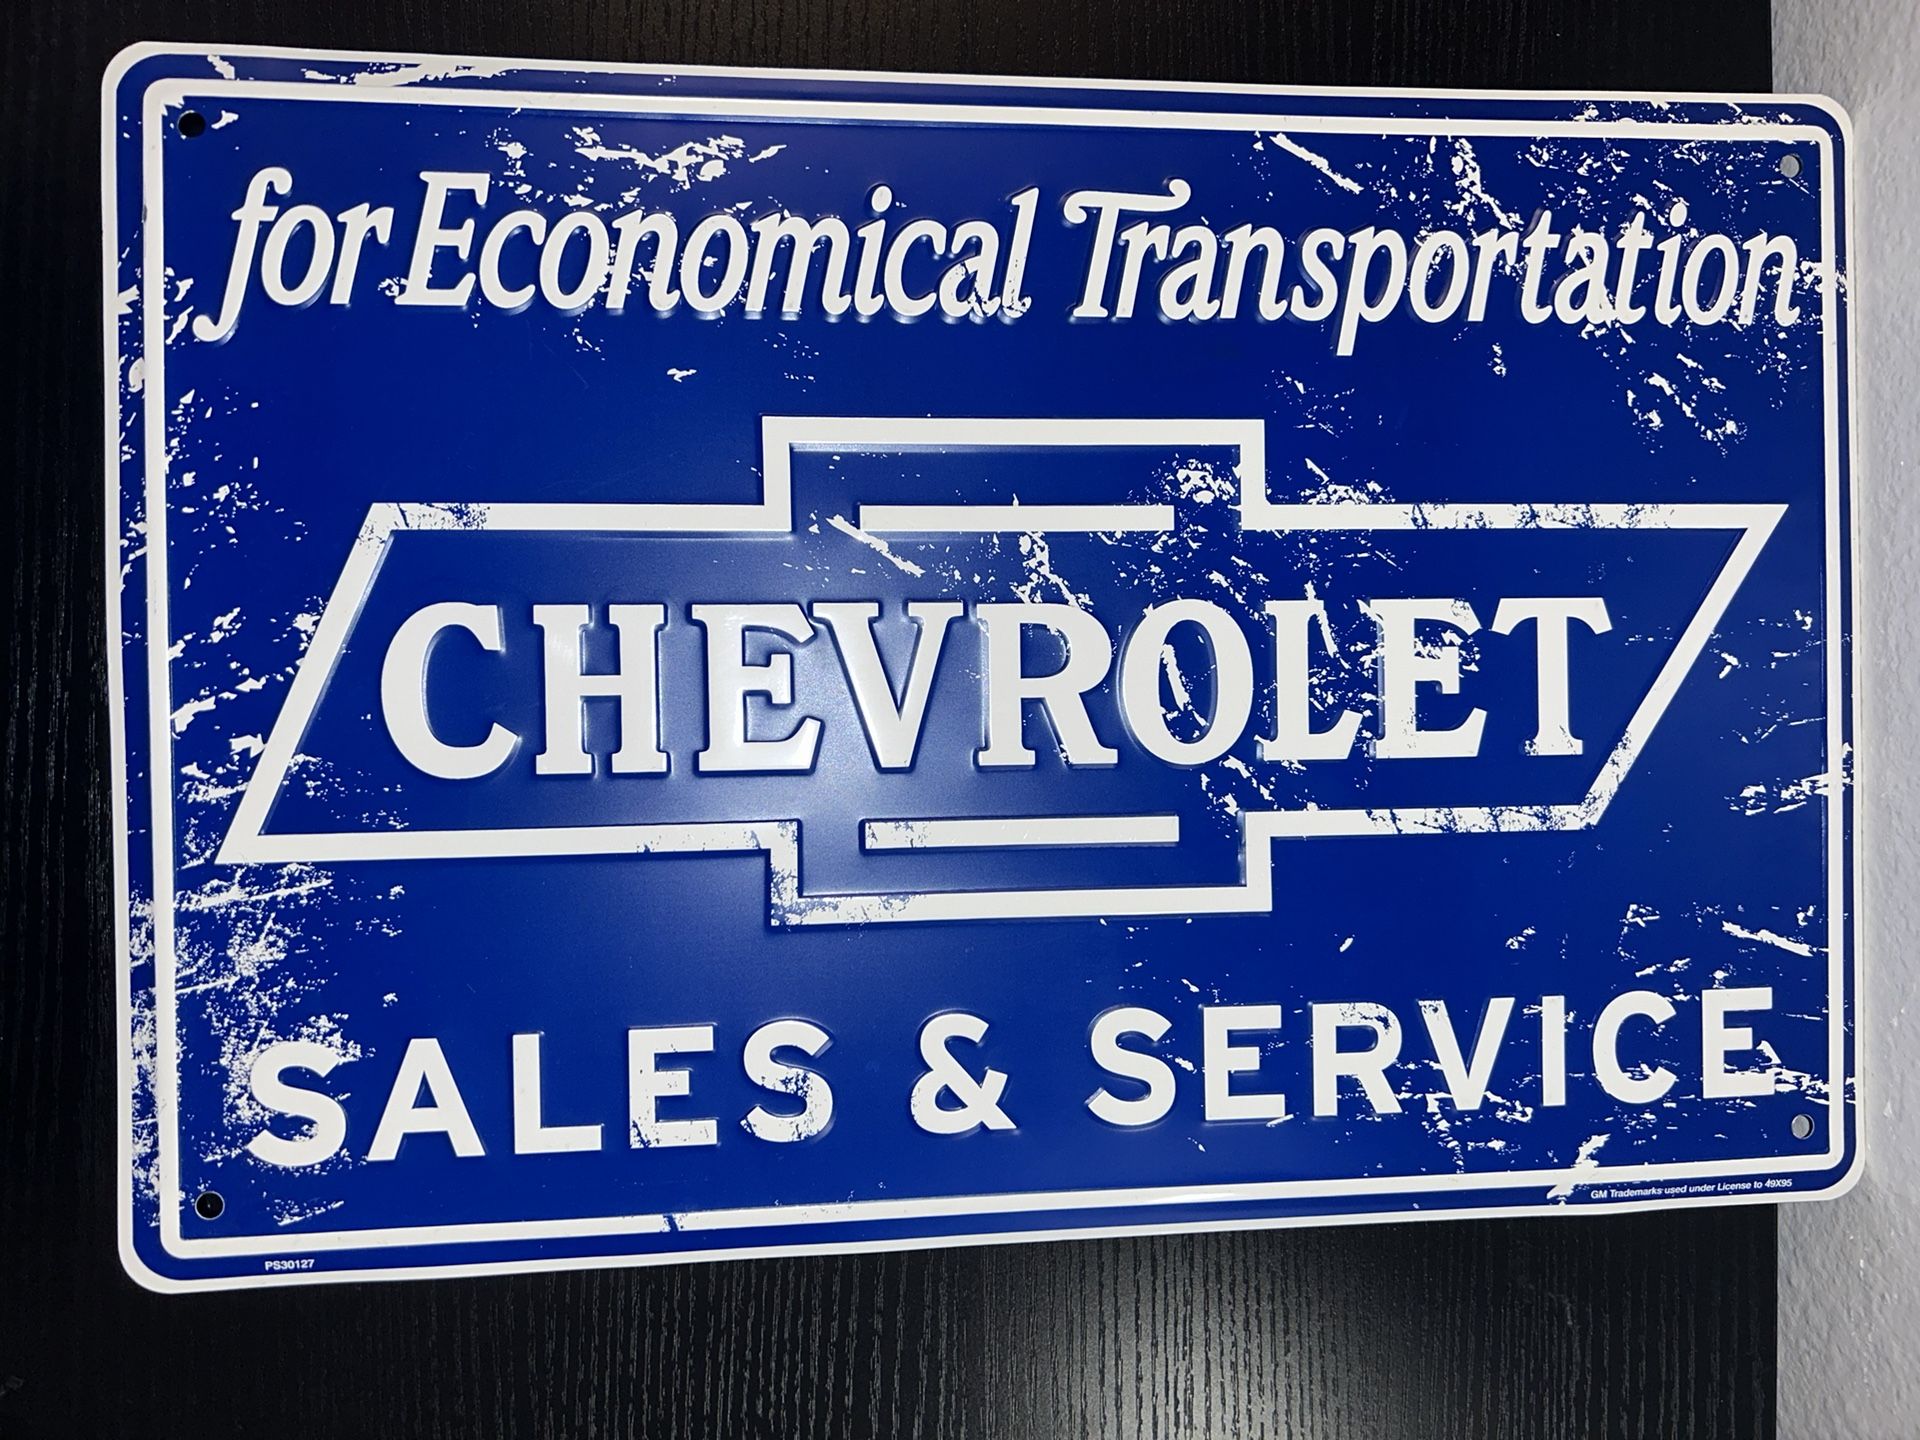 CHEVROLET SALES AND SERVICE MOTOR Oil Vintage Style Steel Sign Pump Plate 12x18”